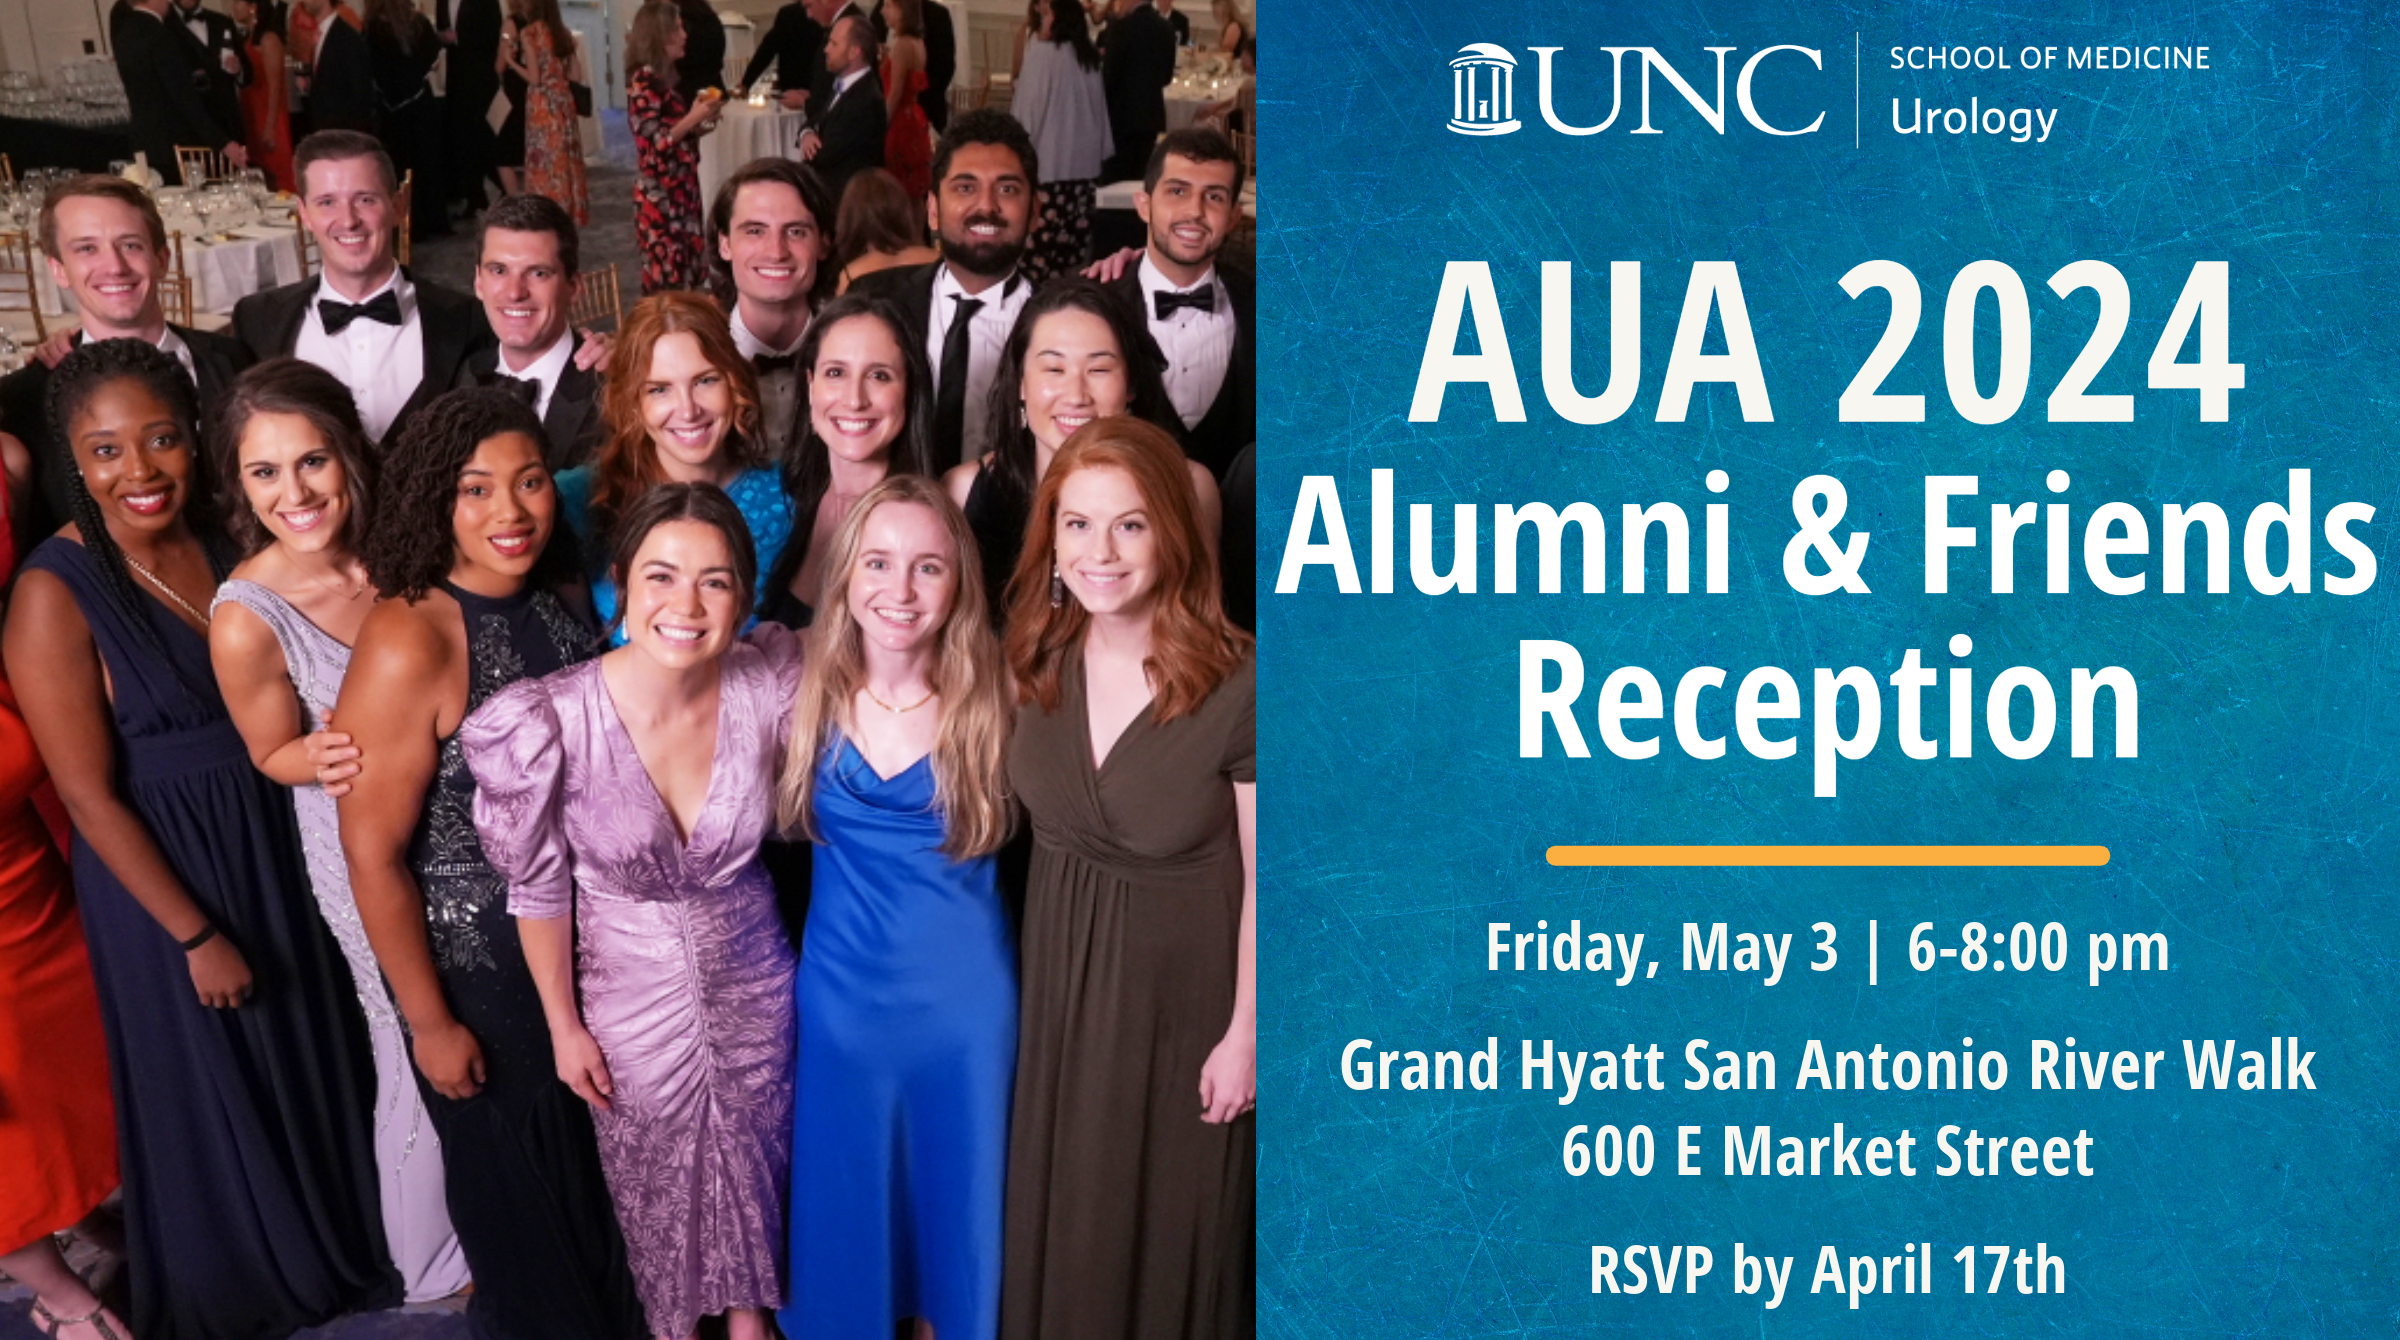 Join Us at the UNC Urology AUA 2024 Alumni and Friends Reception